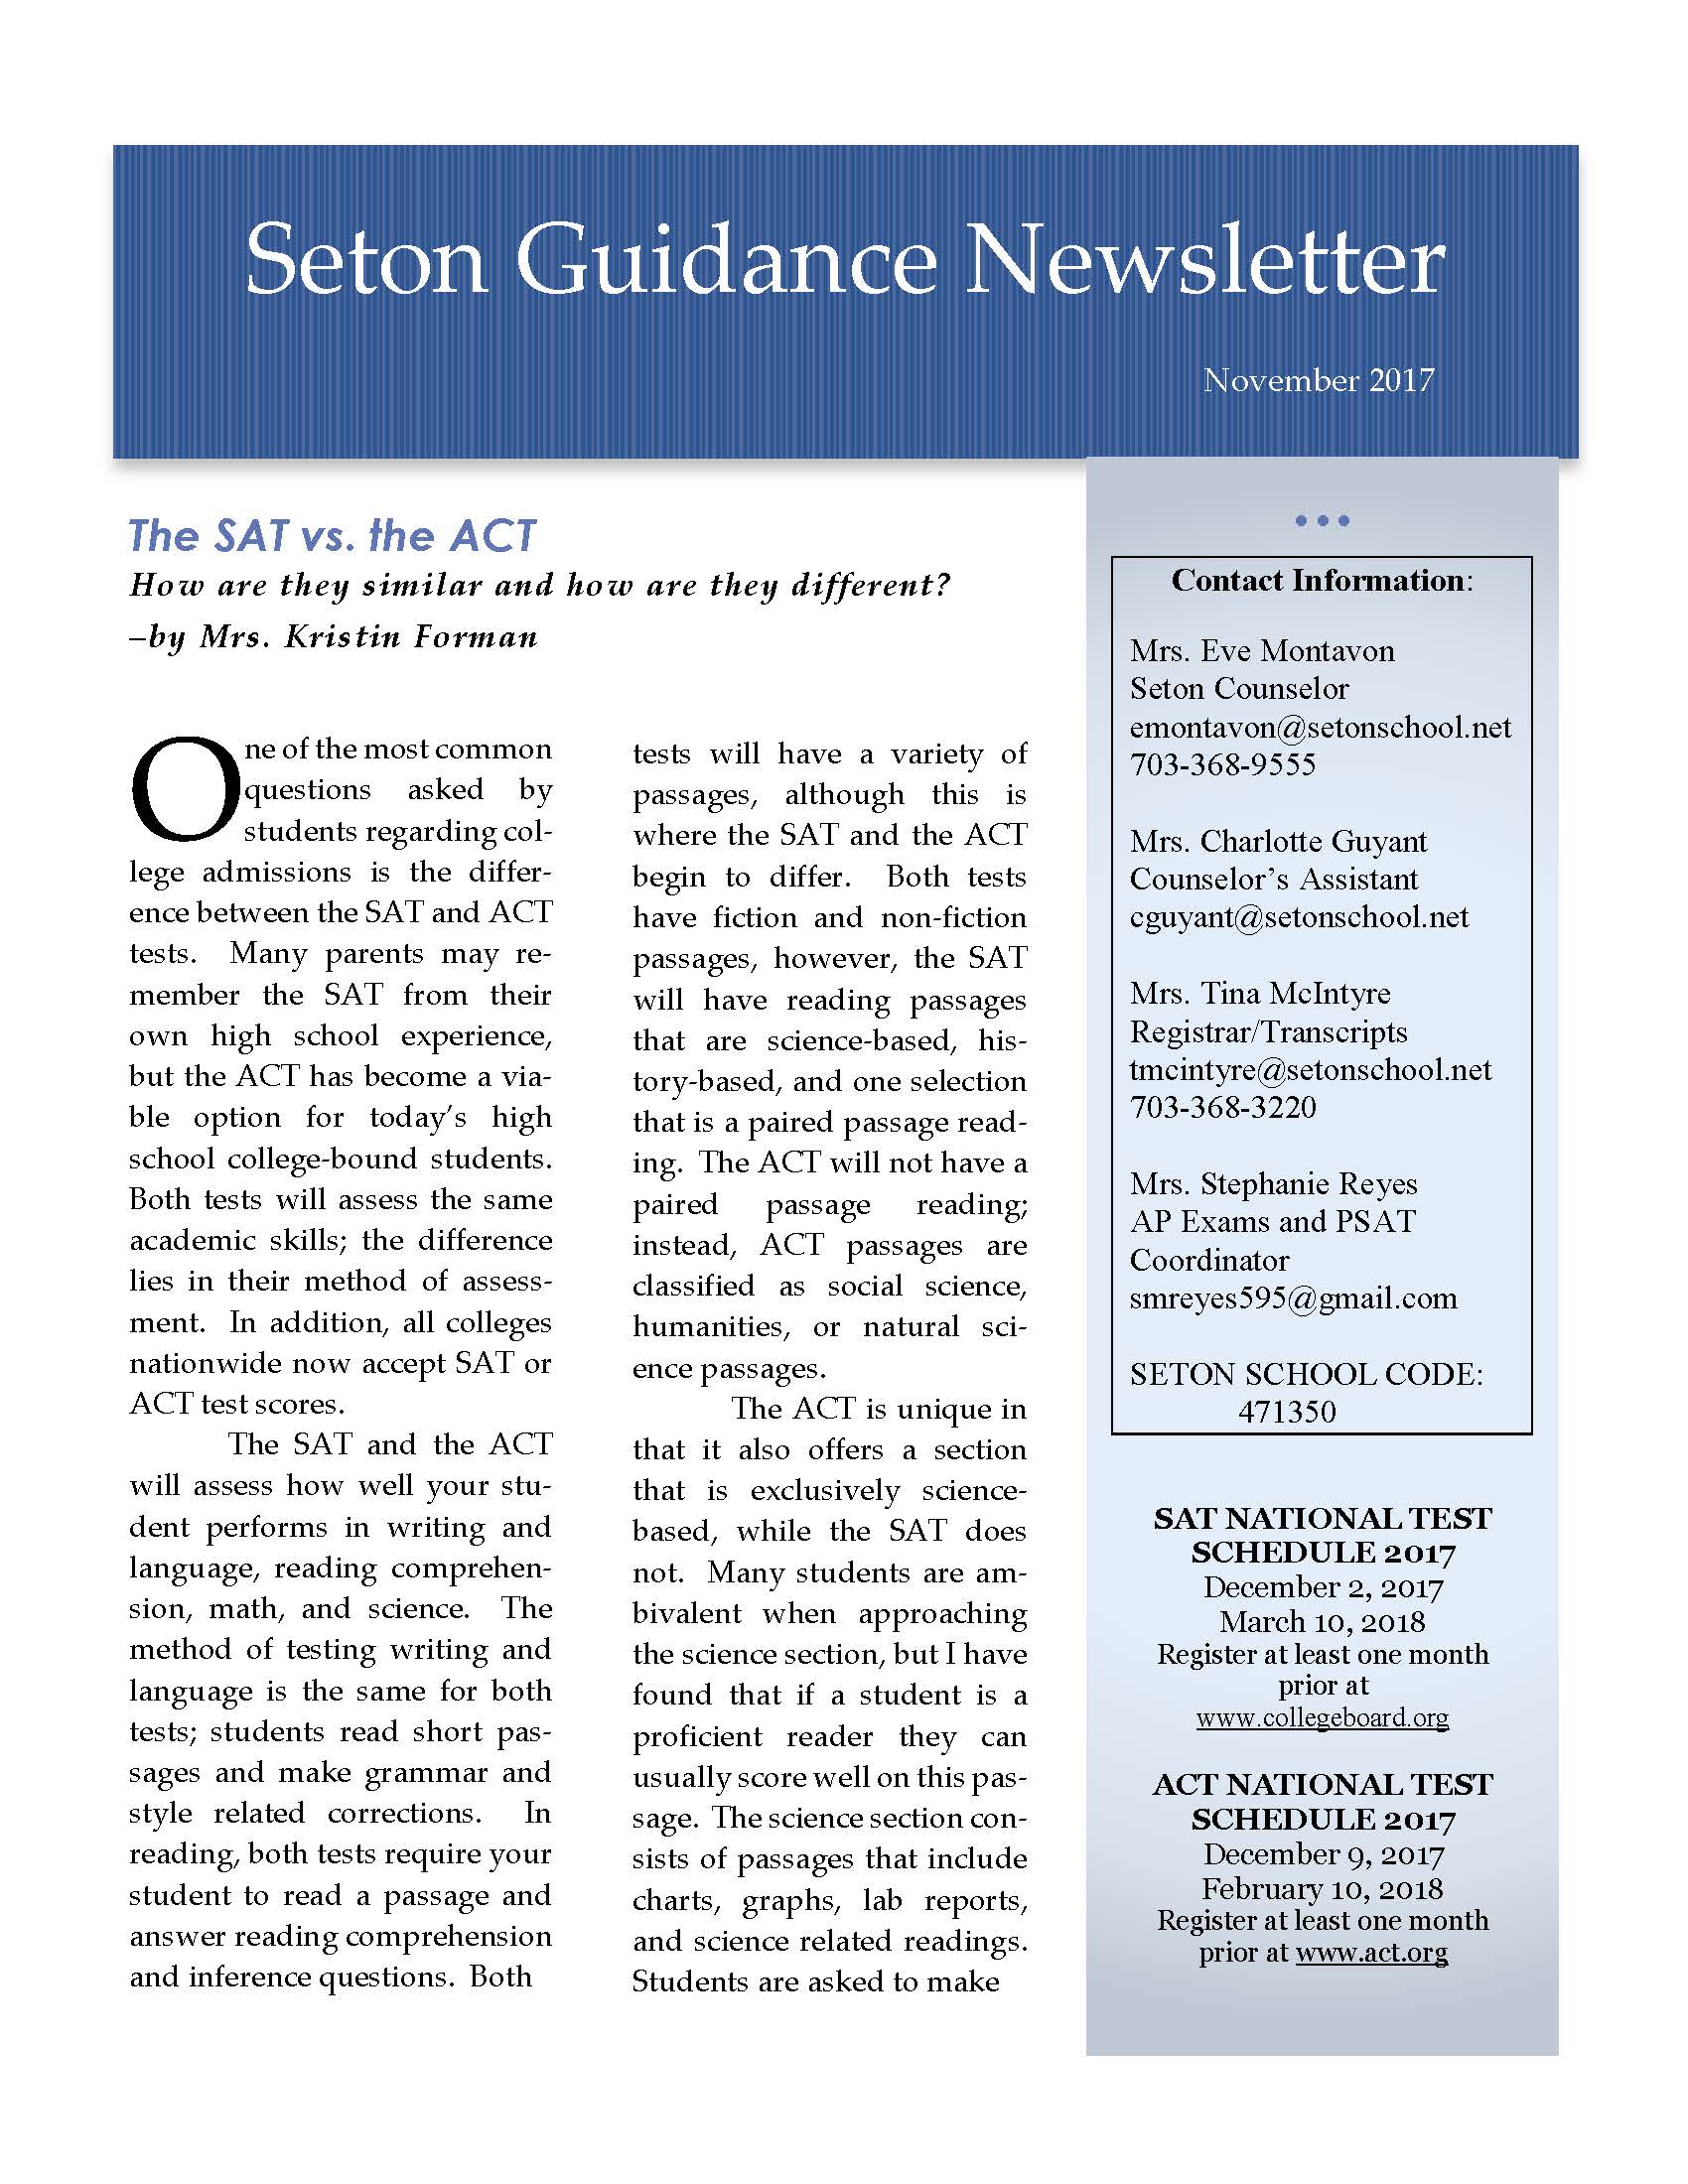 May 2017 Guidance Newsletter